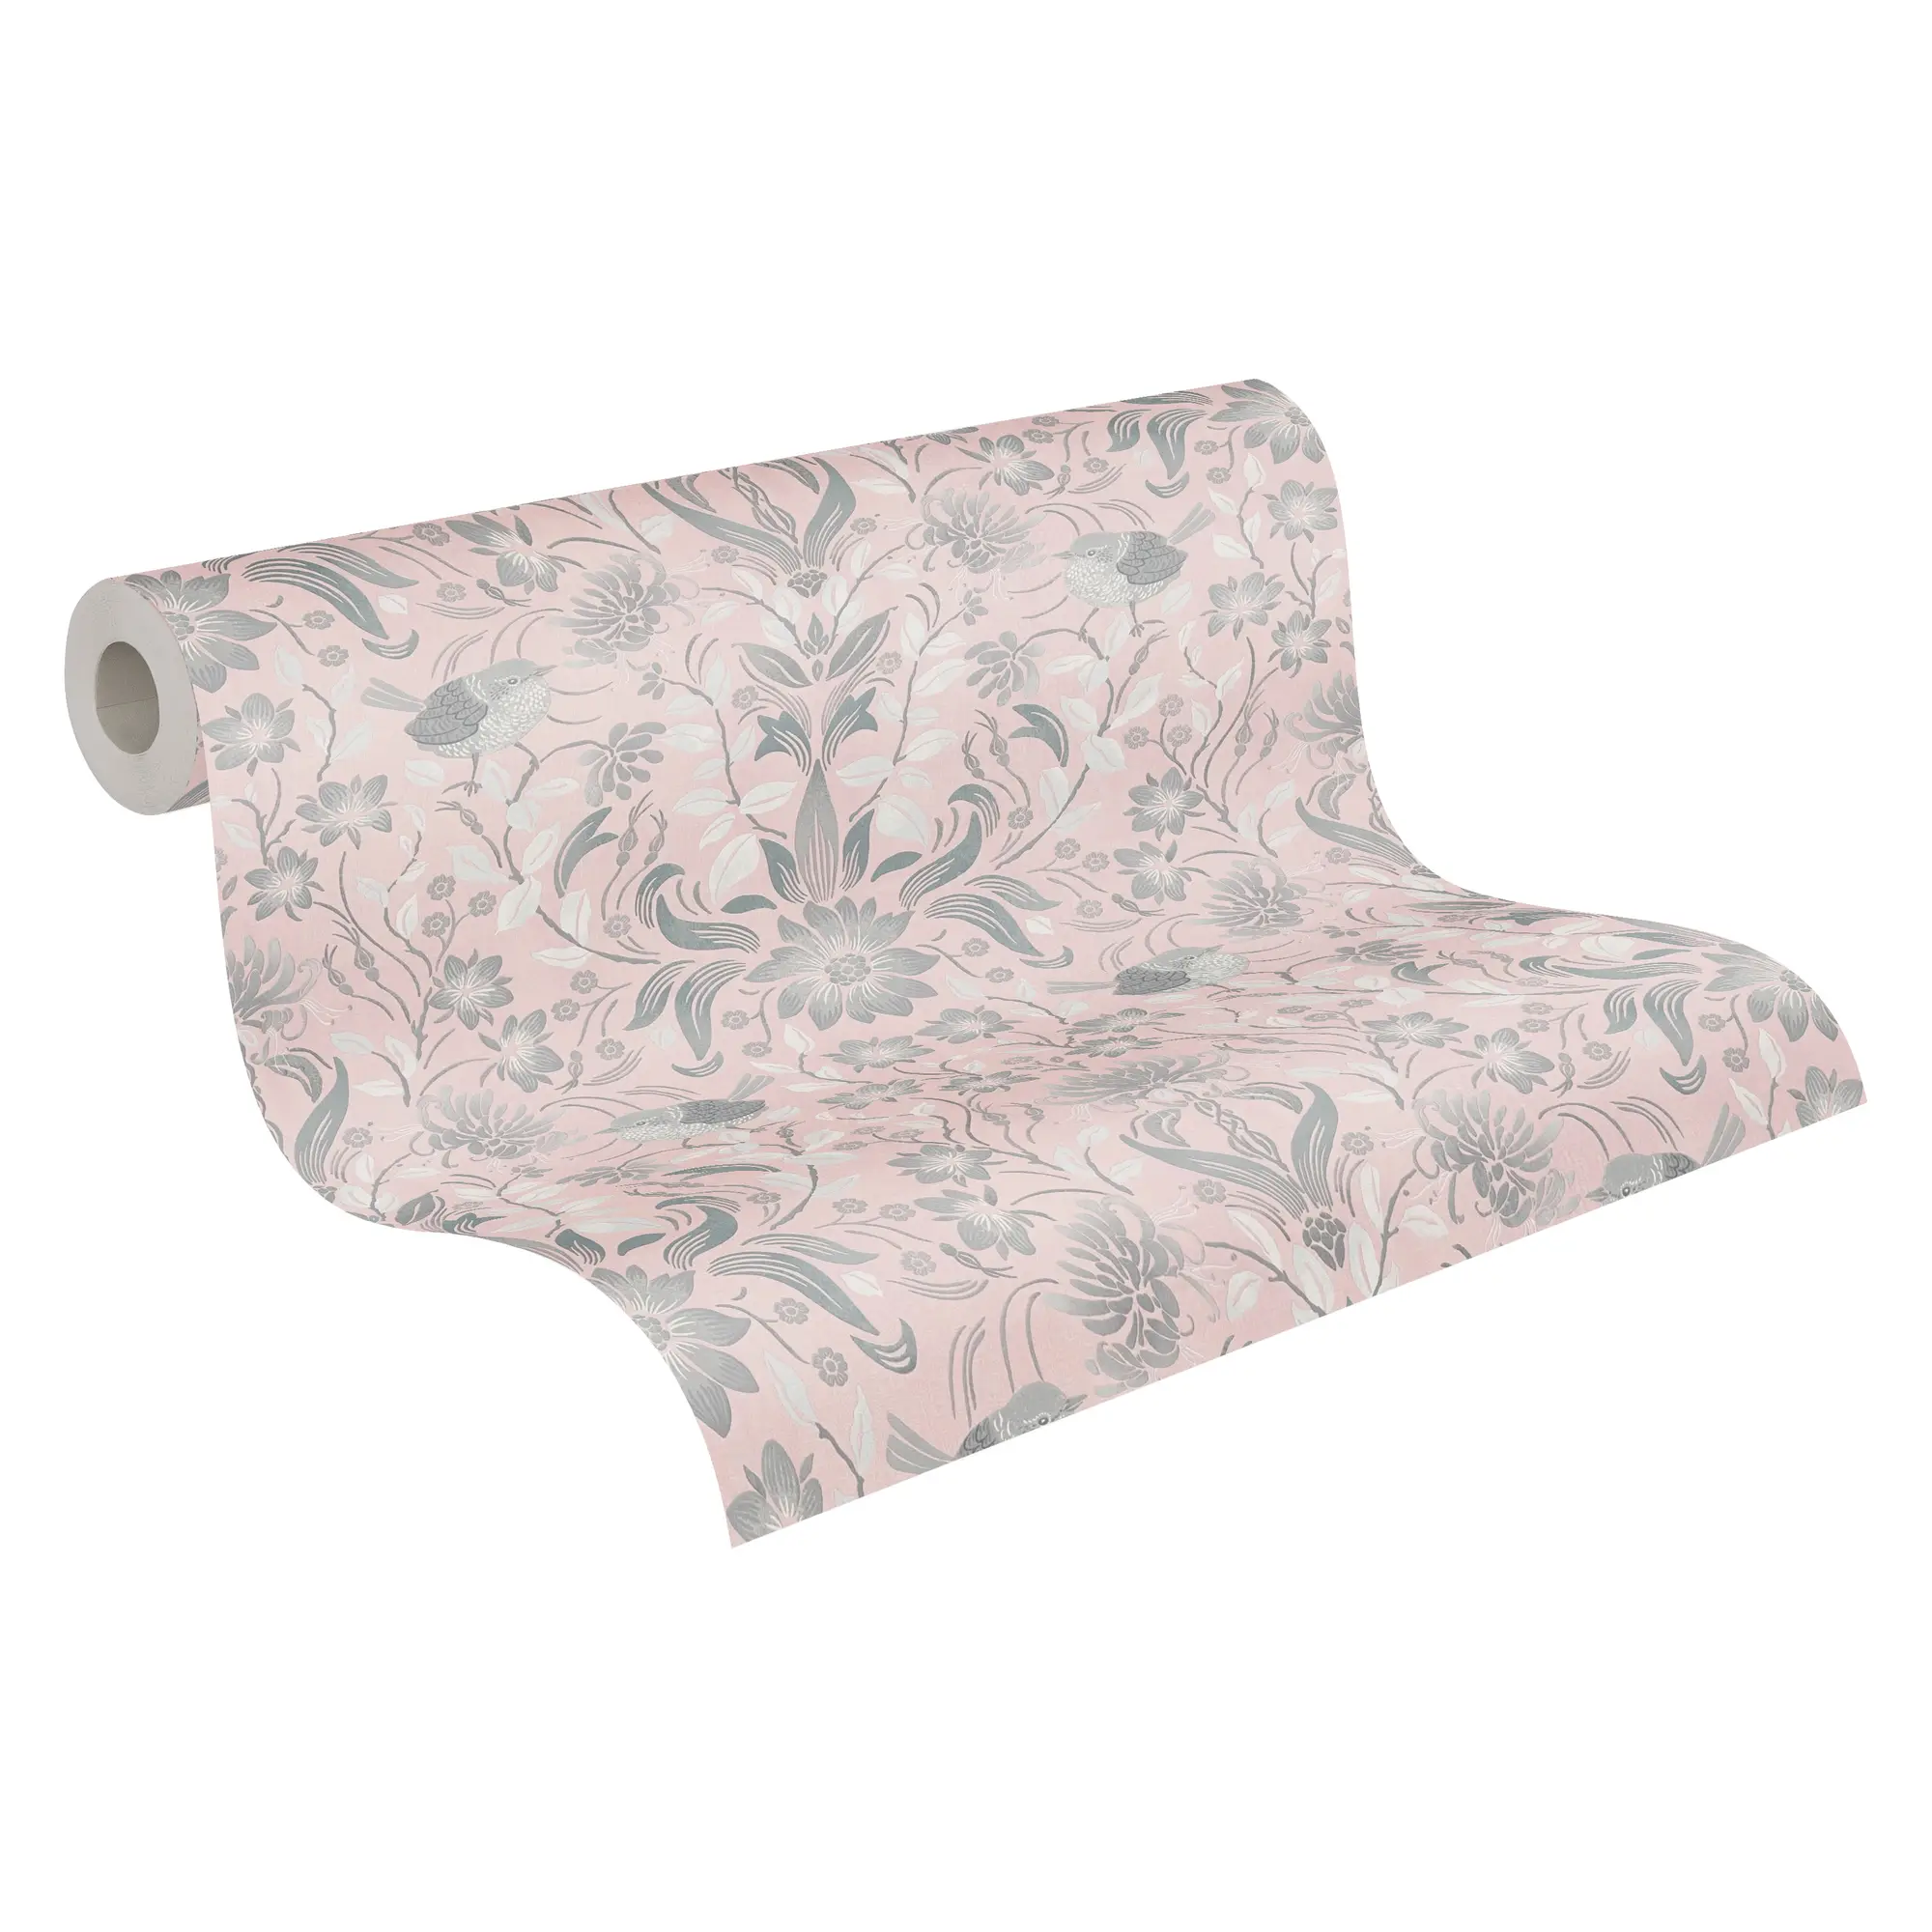 Tapete Floral Rosa Grau Wei脽